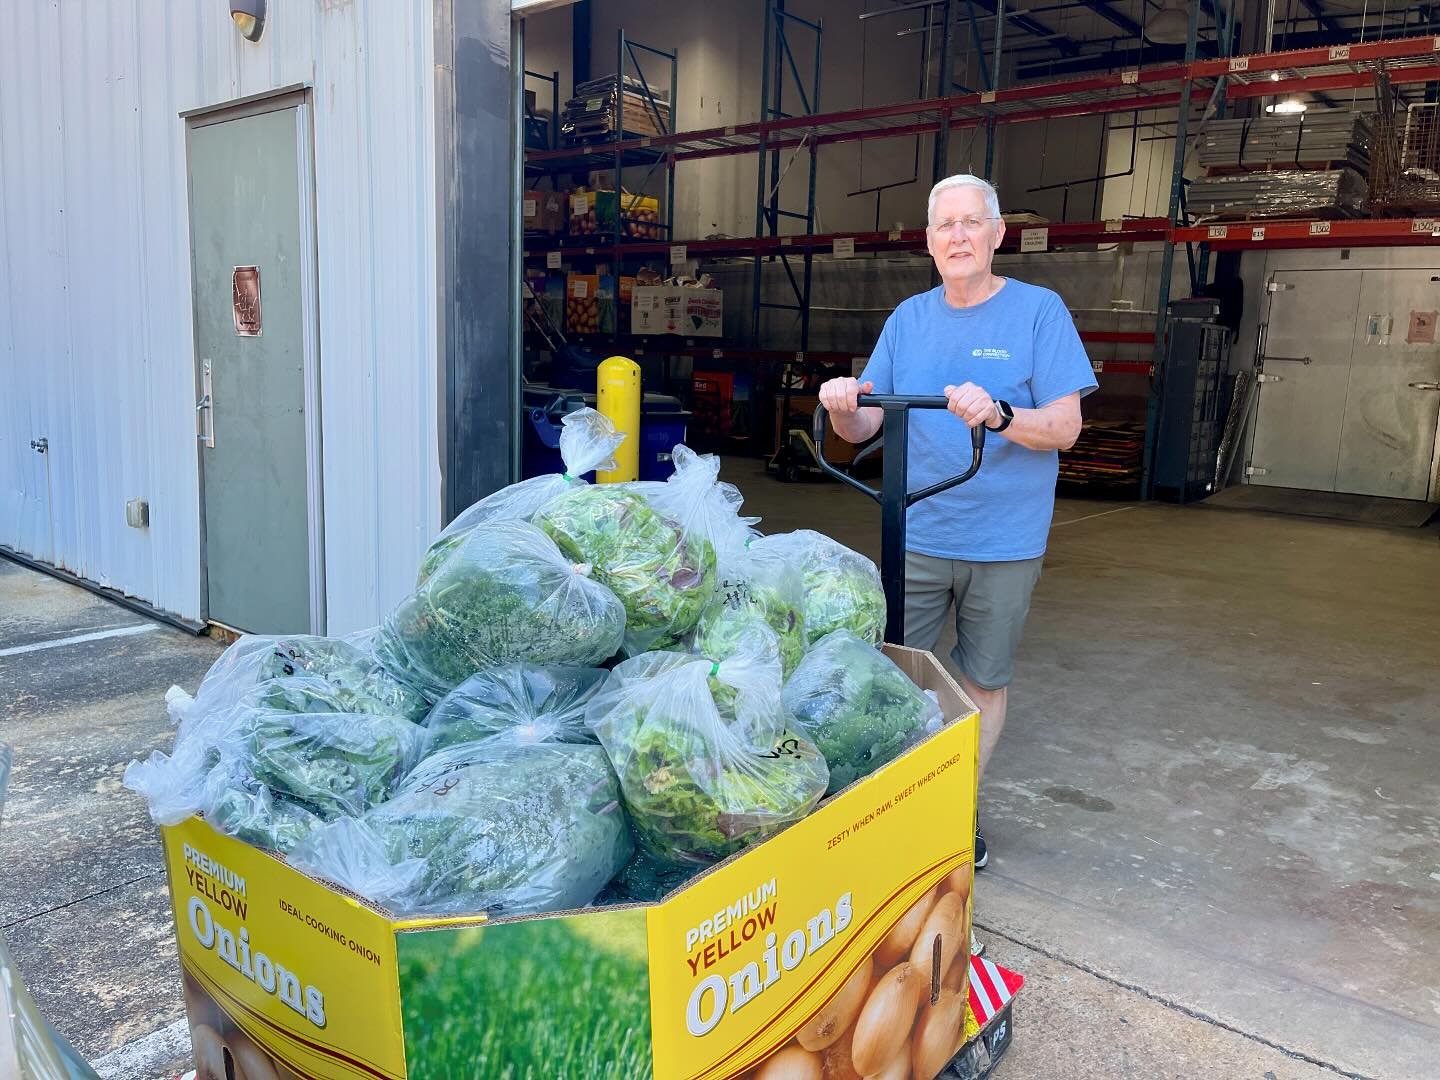 This is what 121# of food looks like! We are honored to partner with @cporaleigh to supply healthy, nutrient dense produce for their Food Pantry Services through our Farmshare program. Families who visit receive a week&rsquo;s worth of groceries and 